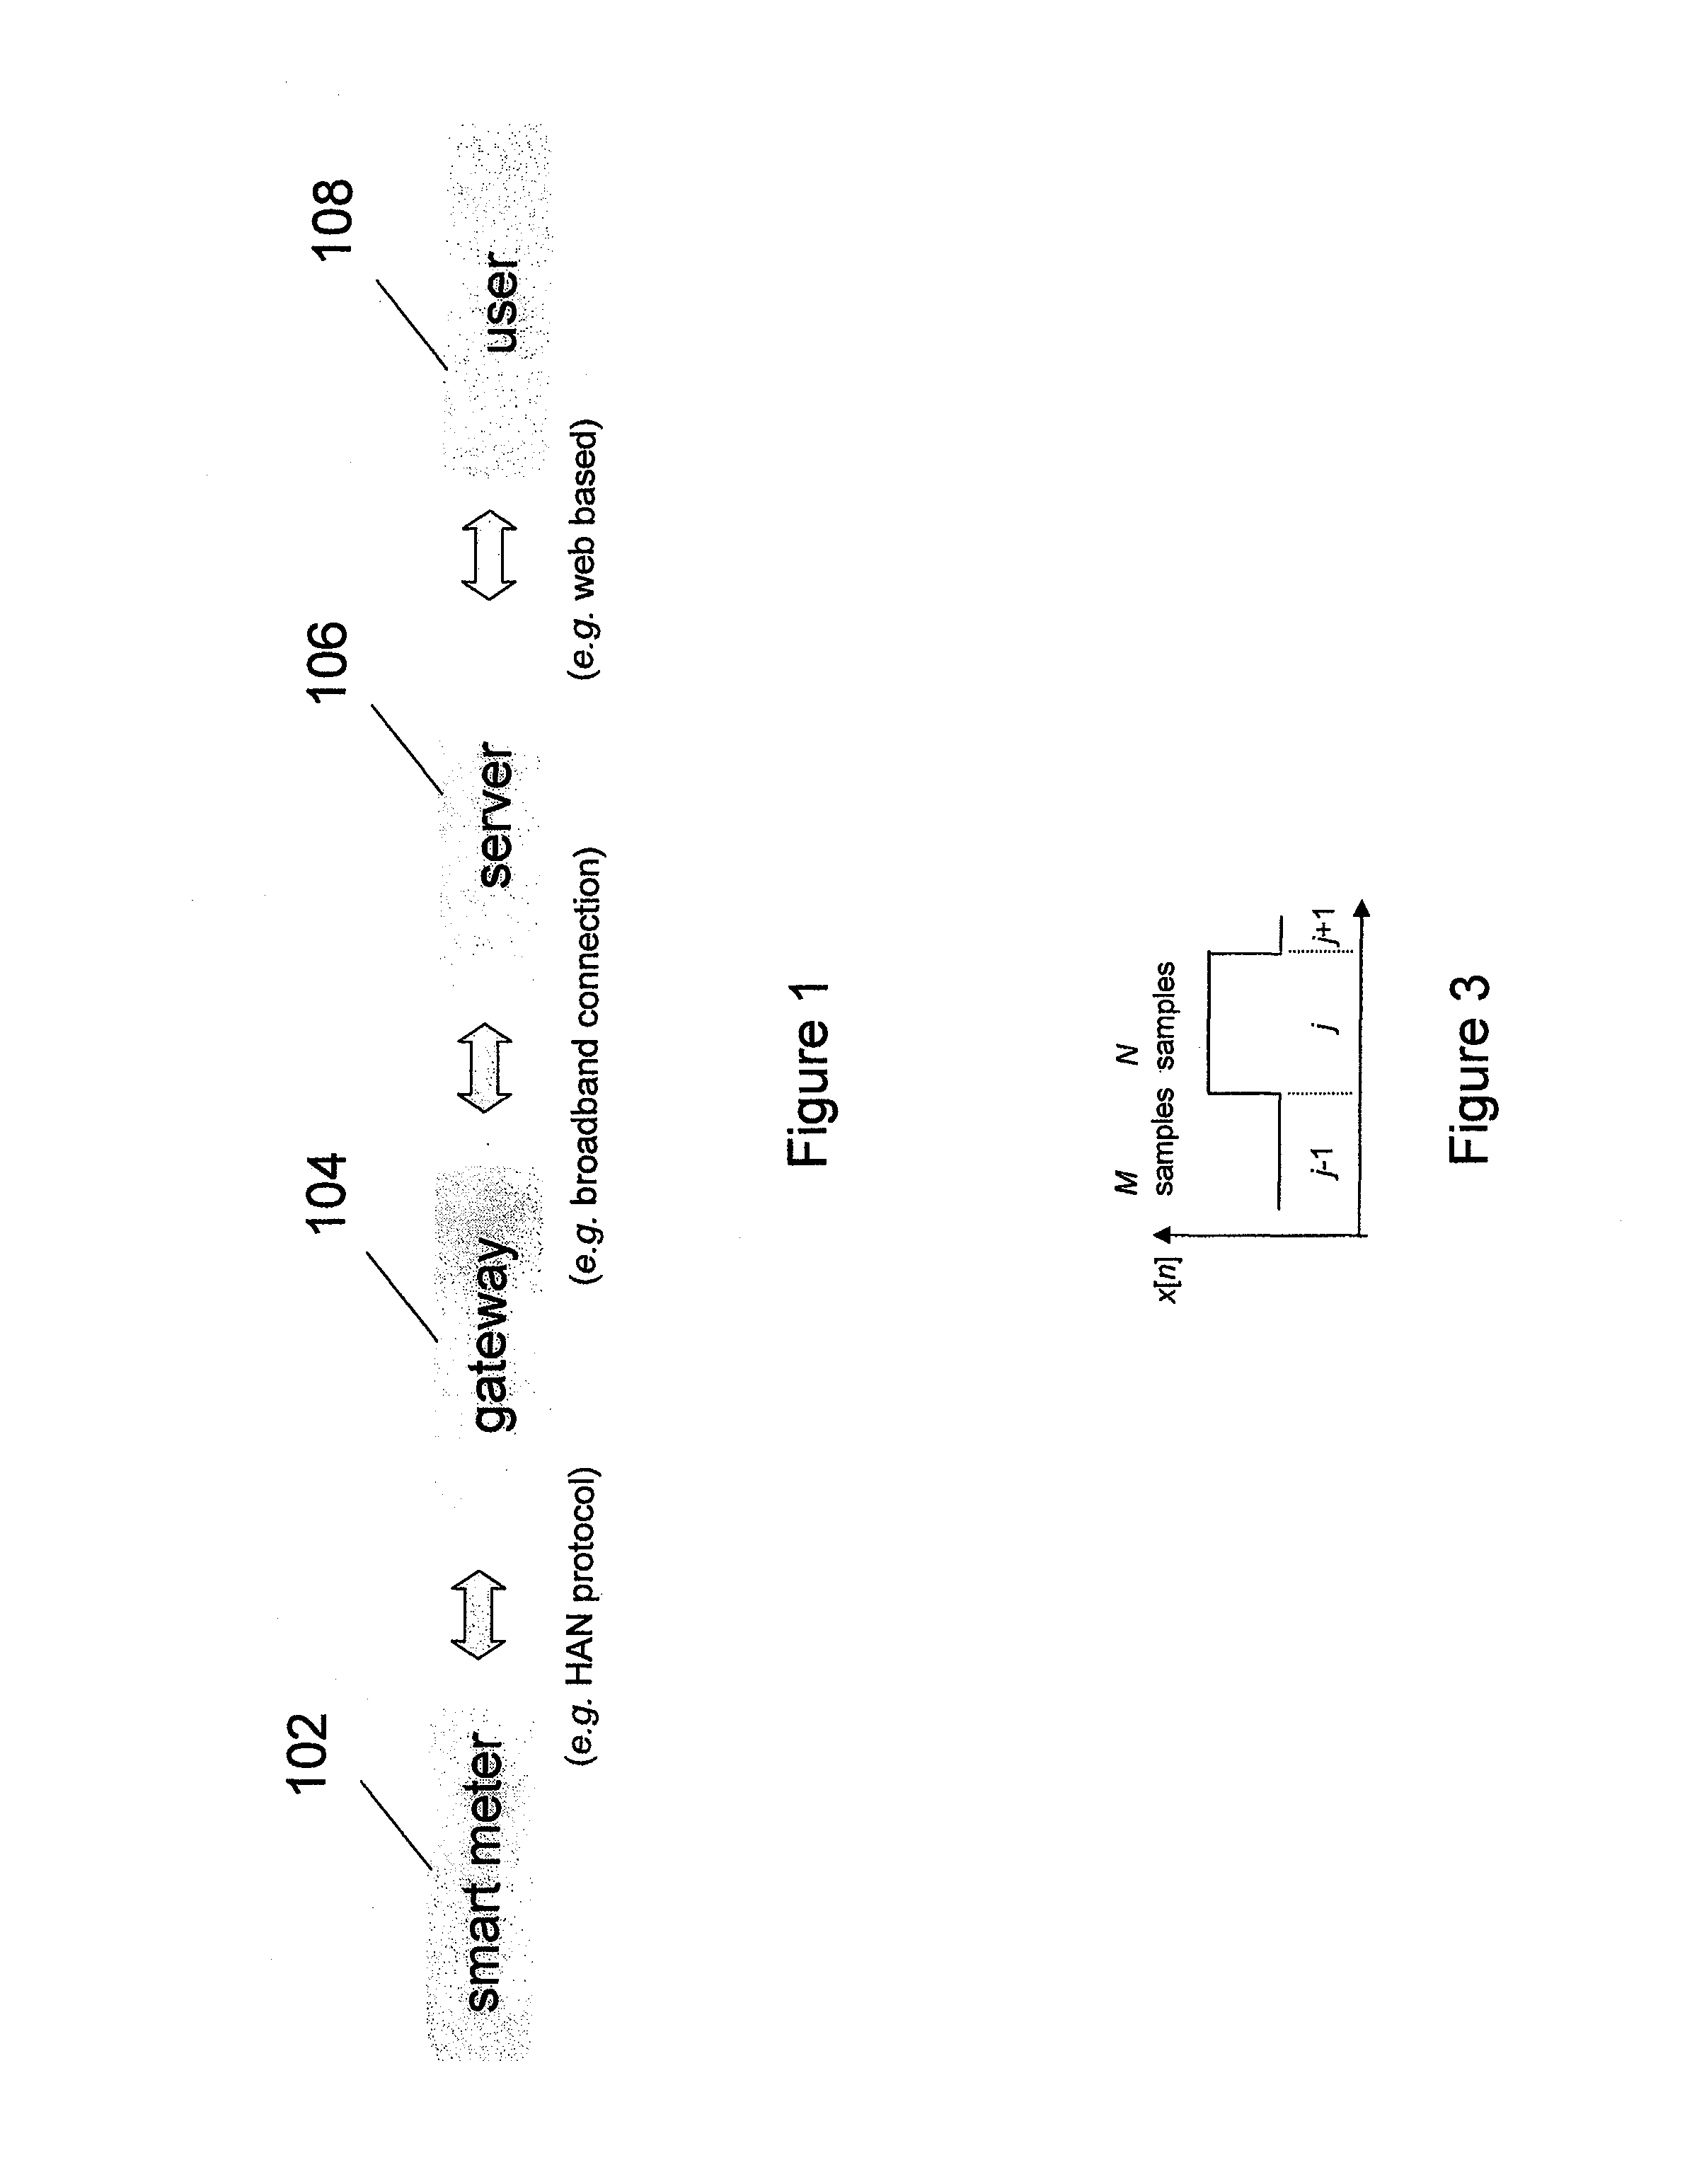 System and method for electric load recognition from centrally monitored power signal and its application to home energy management